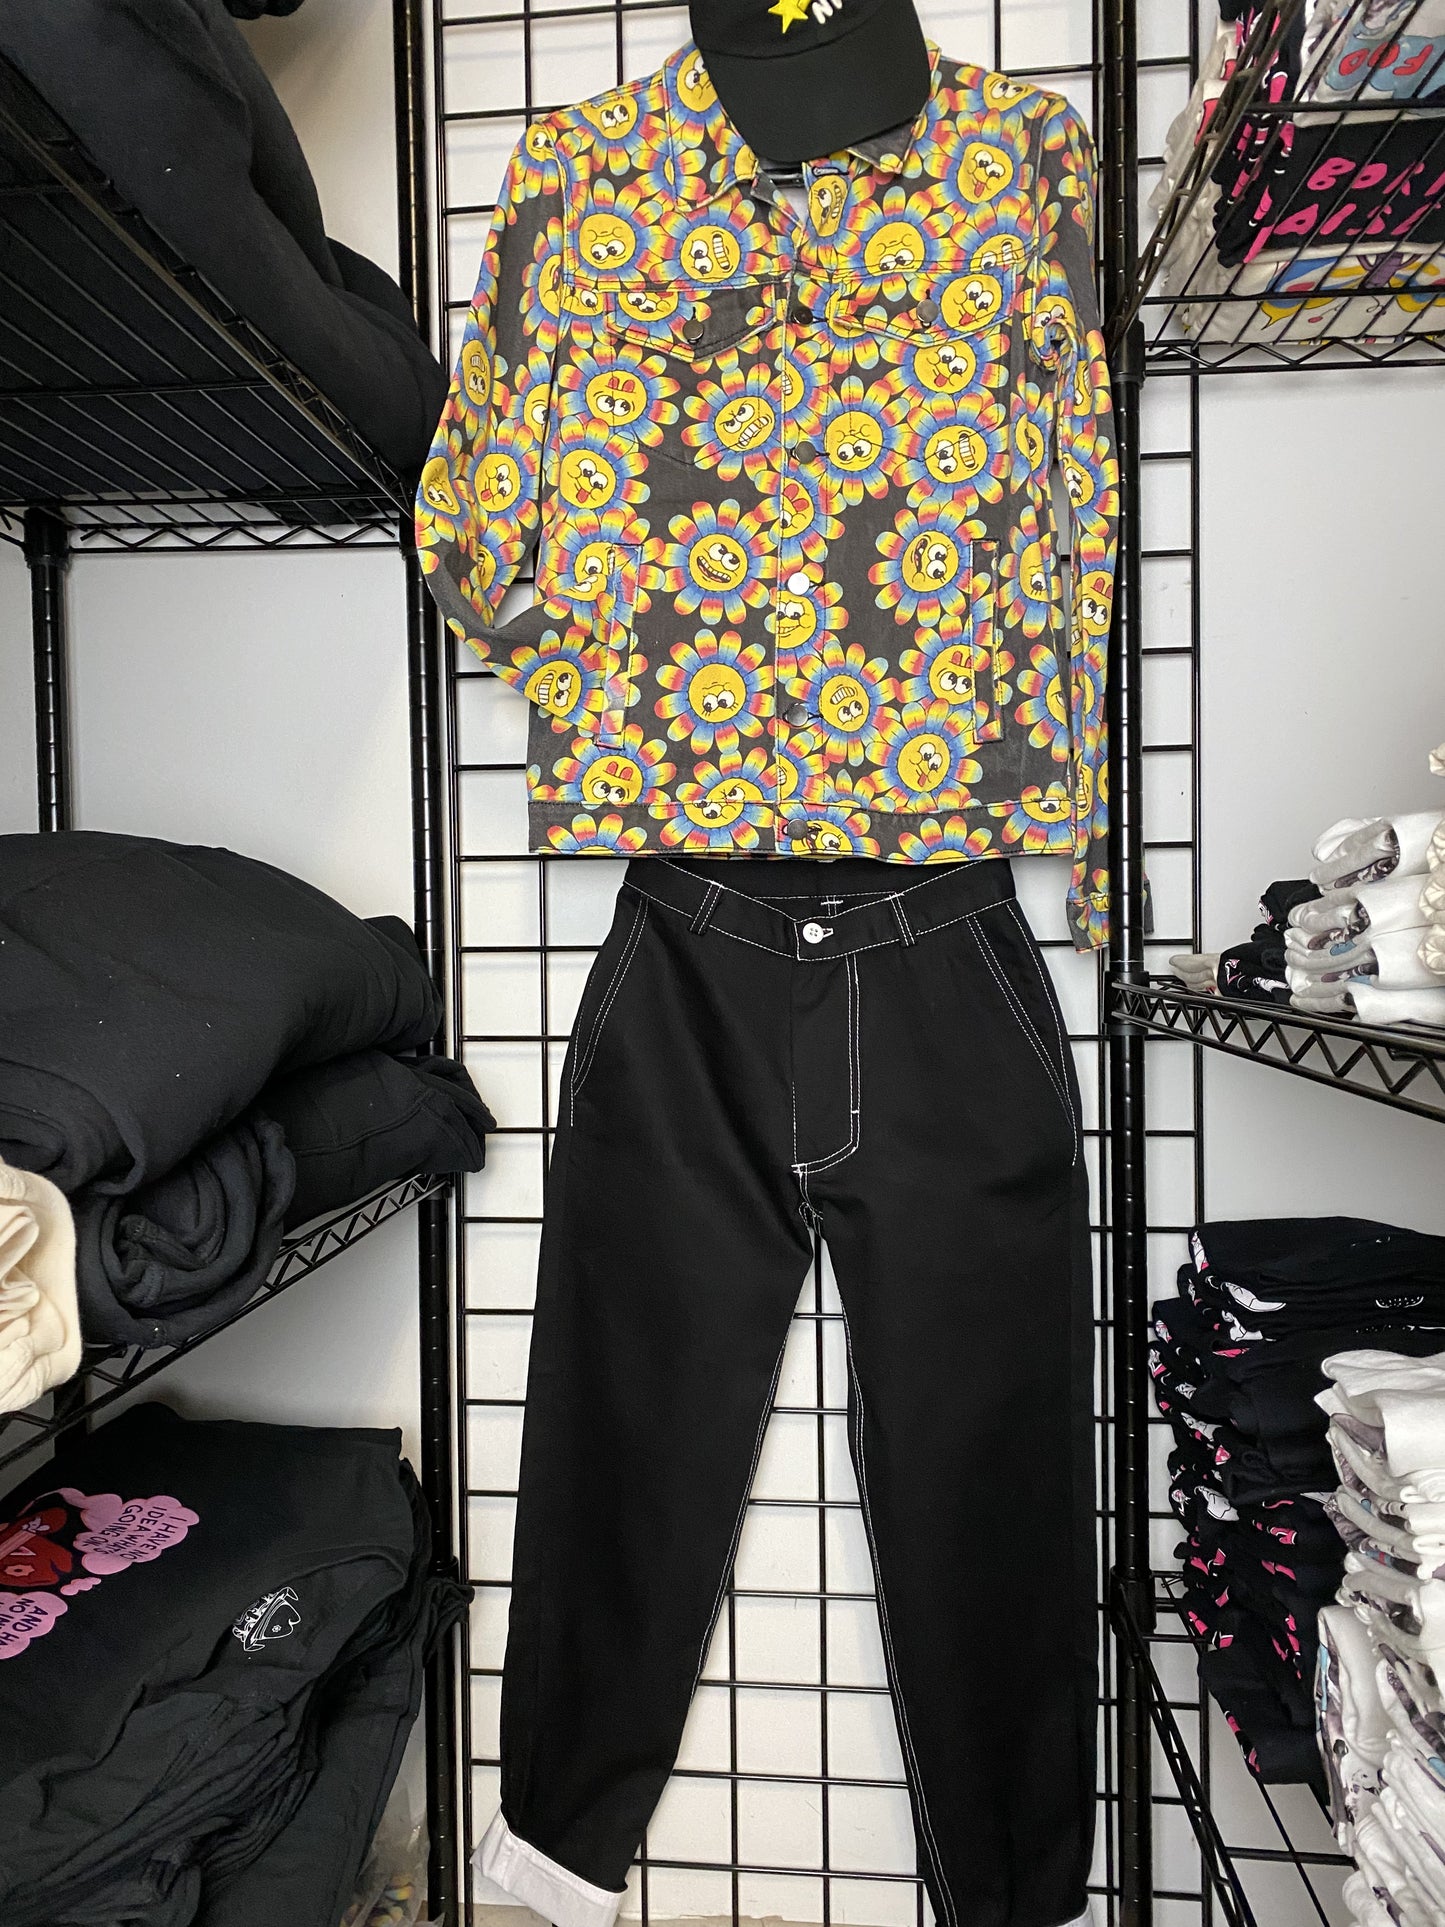 A picture of a black pair of pants (front view) hung on a black wire mesh background.  The top stitching is white as well as the button.  The cuffs are rolled up to show the white fabric underneath.  Above the paints is a jacket with a print of flowers with smiley faces.  Above the jacket is a back baseball cap.